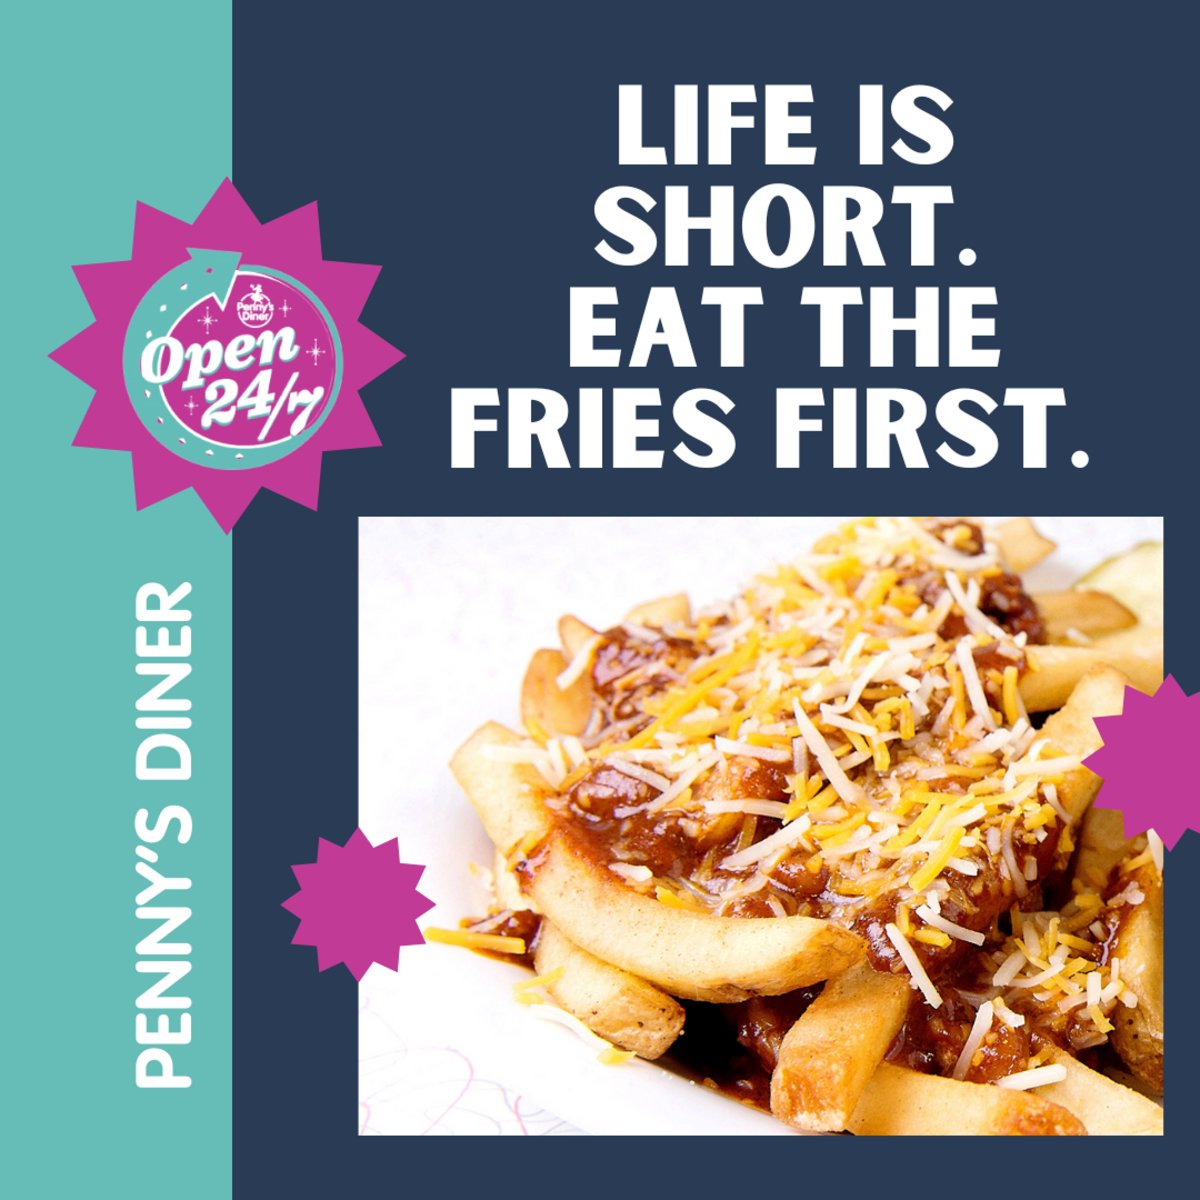 Like we always say at Penny's Diner Vaughn, chili cheese the day! Stop by and kick off your feast with a basket of our legendary #chilicheesefries. Get 'em while they're hot!🔥🍟 #PennysDiner